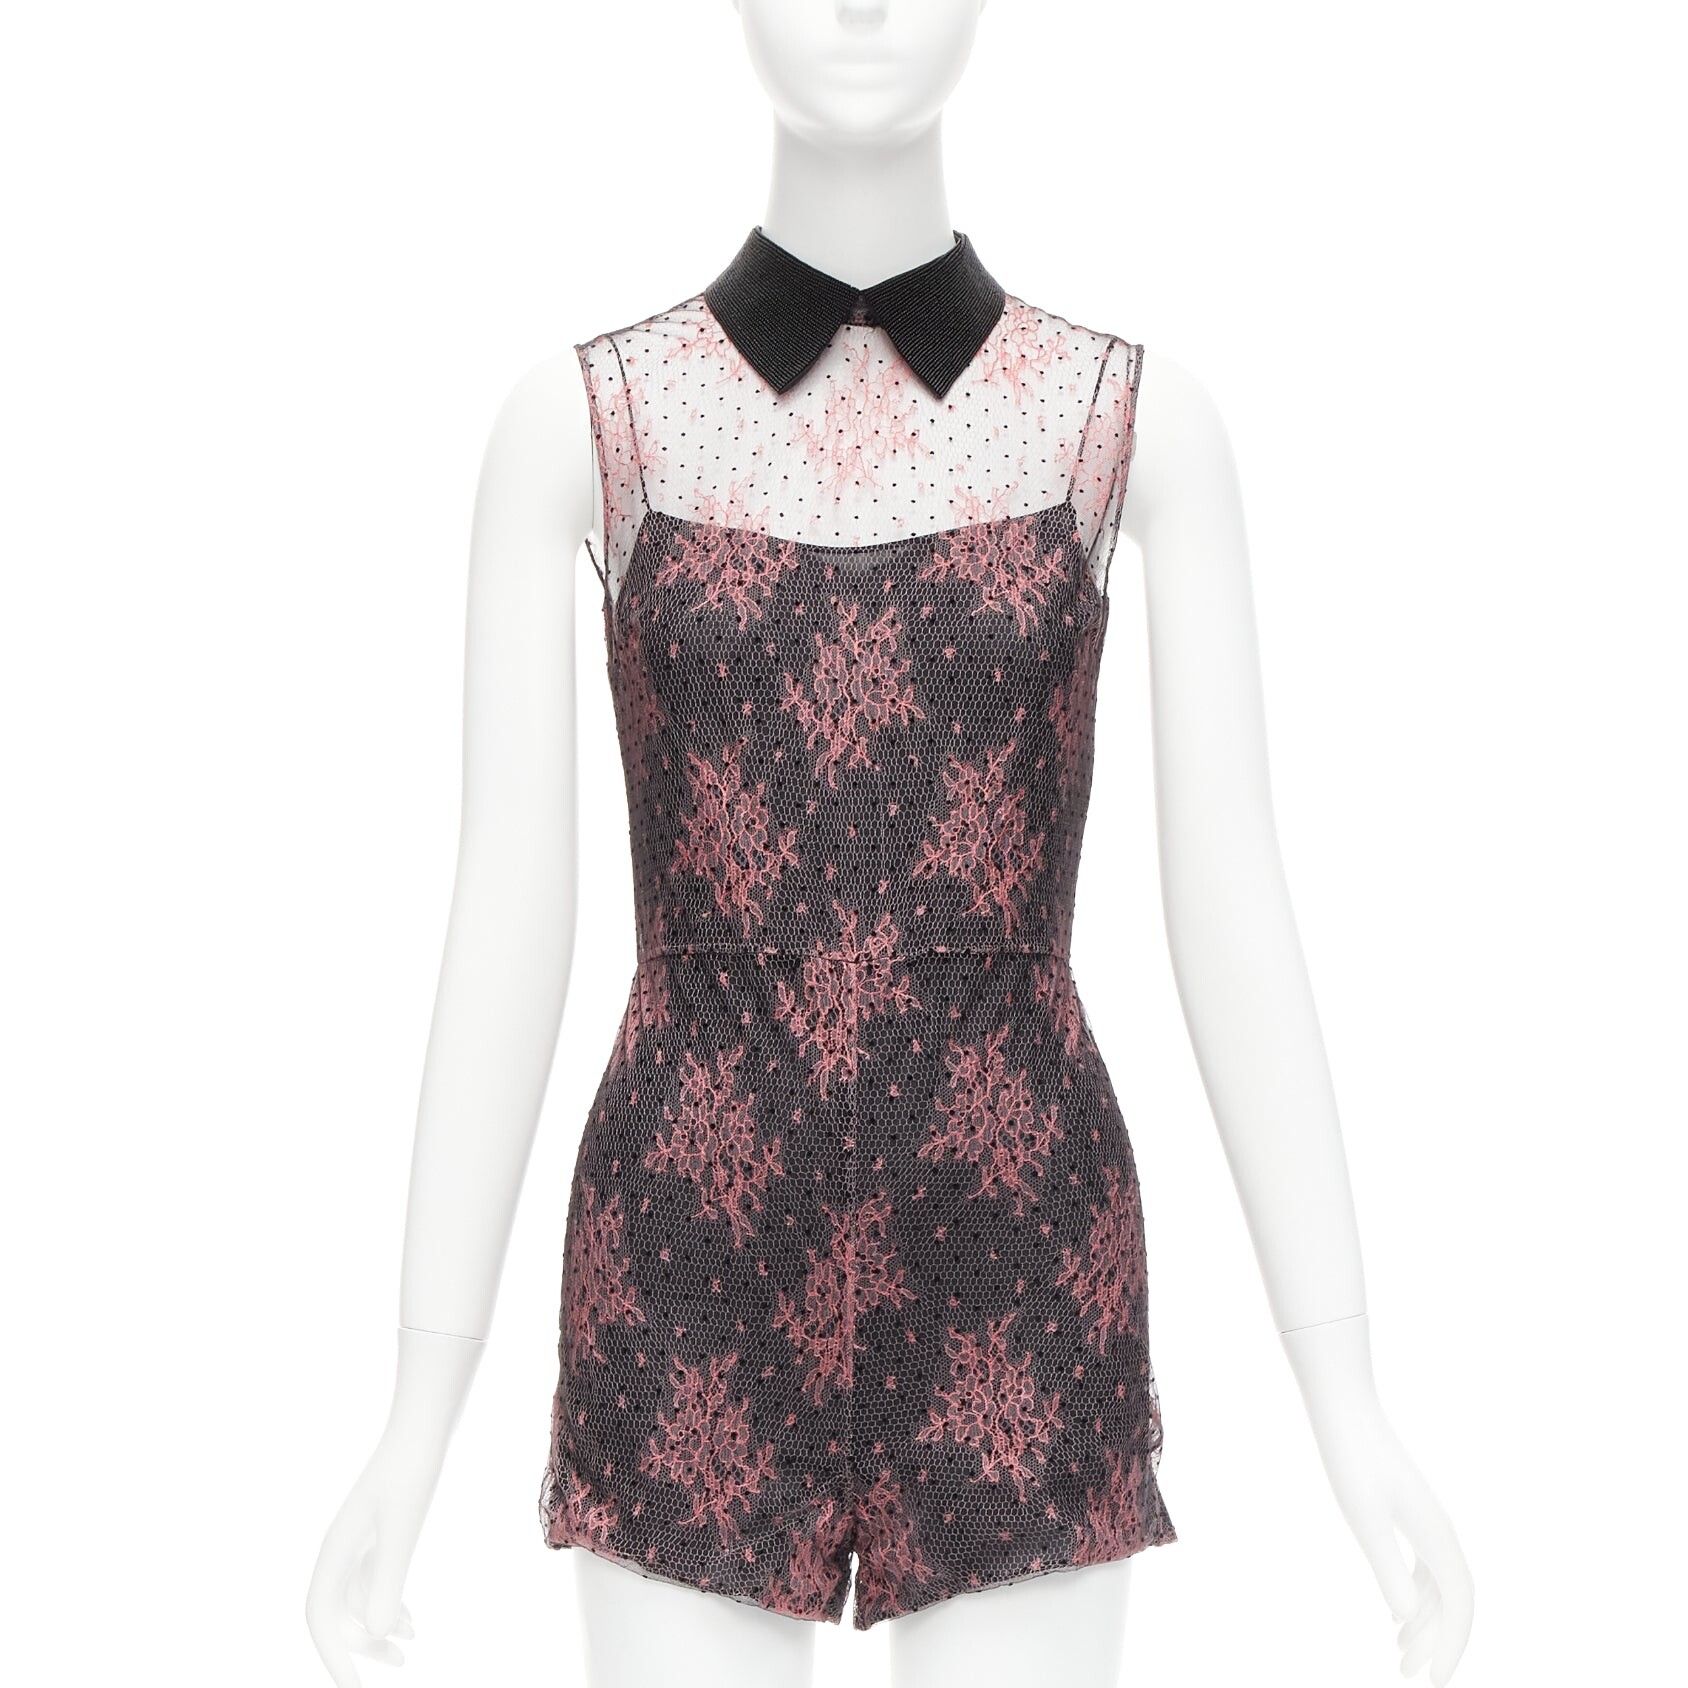 Dior CHRISTIAN DIOR black pink intricate lace overlay playsuit romper FR34 XS Size 26" / US 2 / IT 38 - 1 Preview